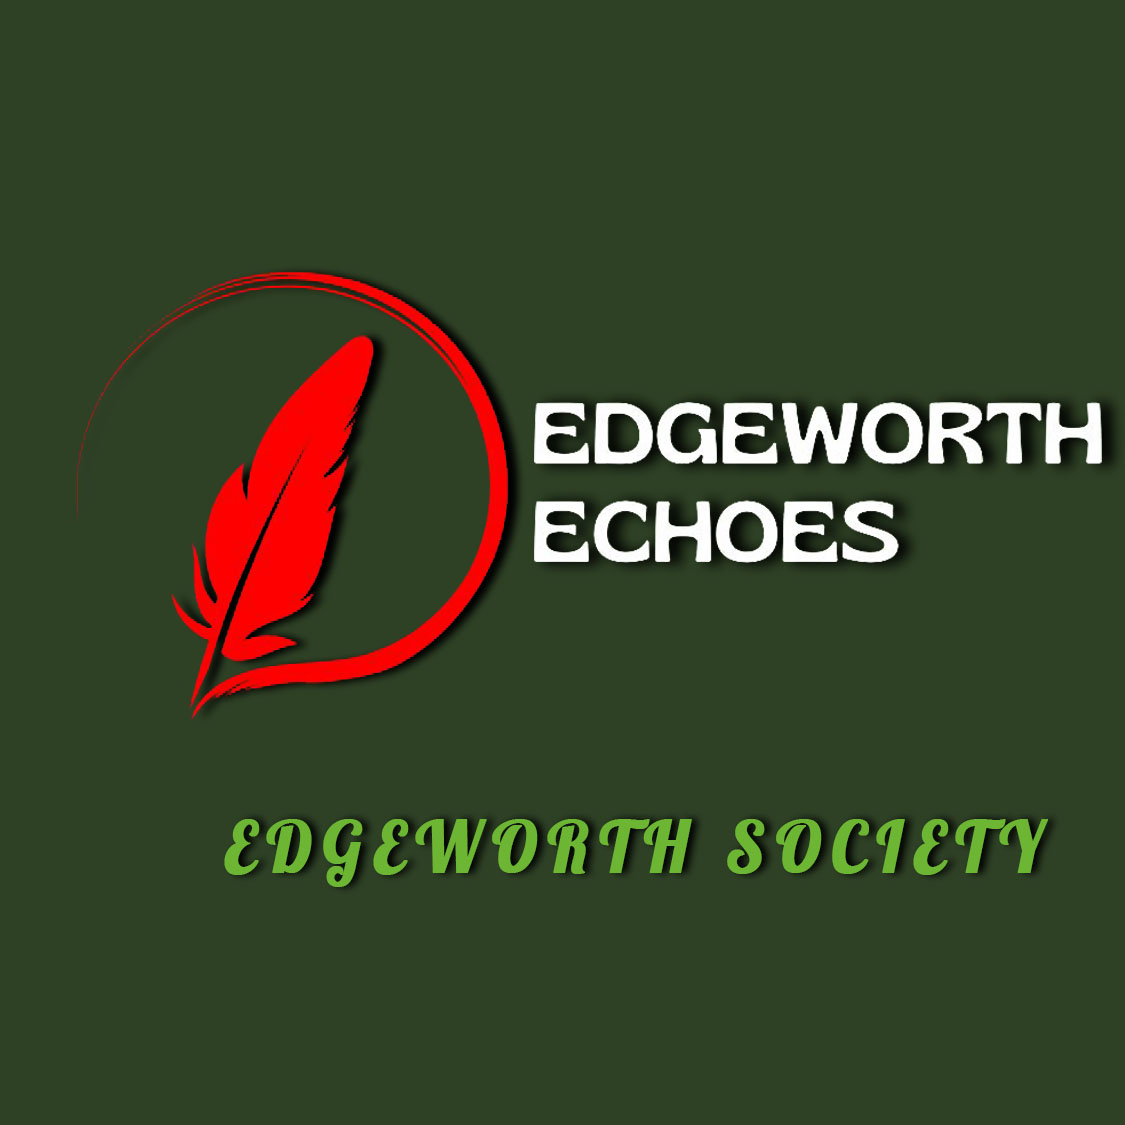 We are delighted to announce the Edgeworth Society podcast ' Edgeworth Echoes' available on Spotify, Amazon Music and YouTube. Only two episodes as yet but we will add more. Please share. #podcasts #edgeworth #mariaedgeworthcenter